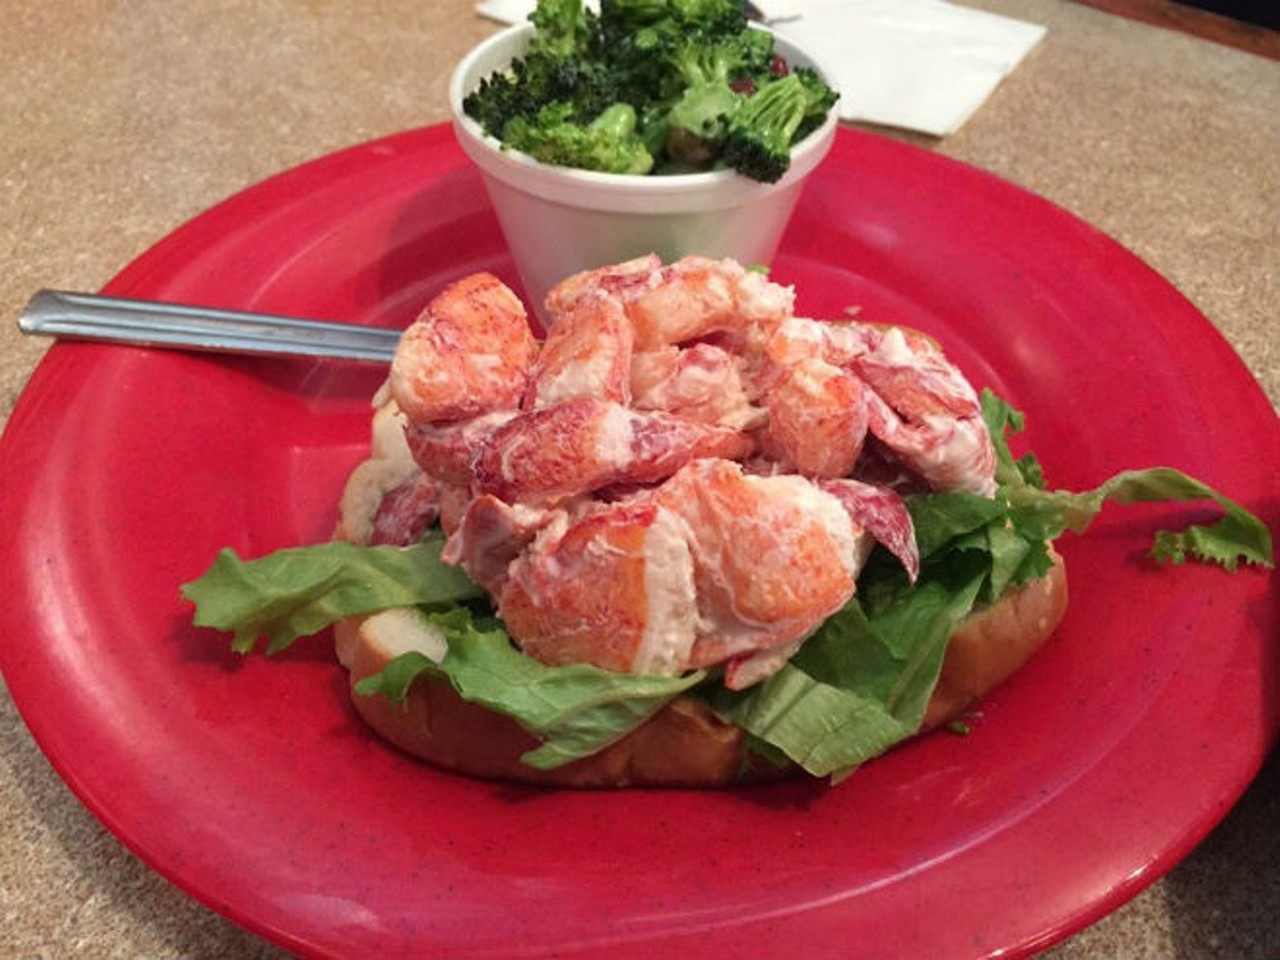 Boston's Fish House
6860 Aloma Ave, Winter Park, 407-678-2107, $
Orders are placed at the counter and payment settled, customers are steered to a vacant table &#150; if there is one. Most seafood is fried, and Ipswich clams are a house specialty. Pictured: Lobster roll. Photo via Yelp